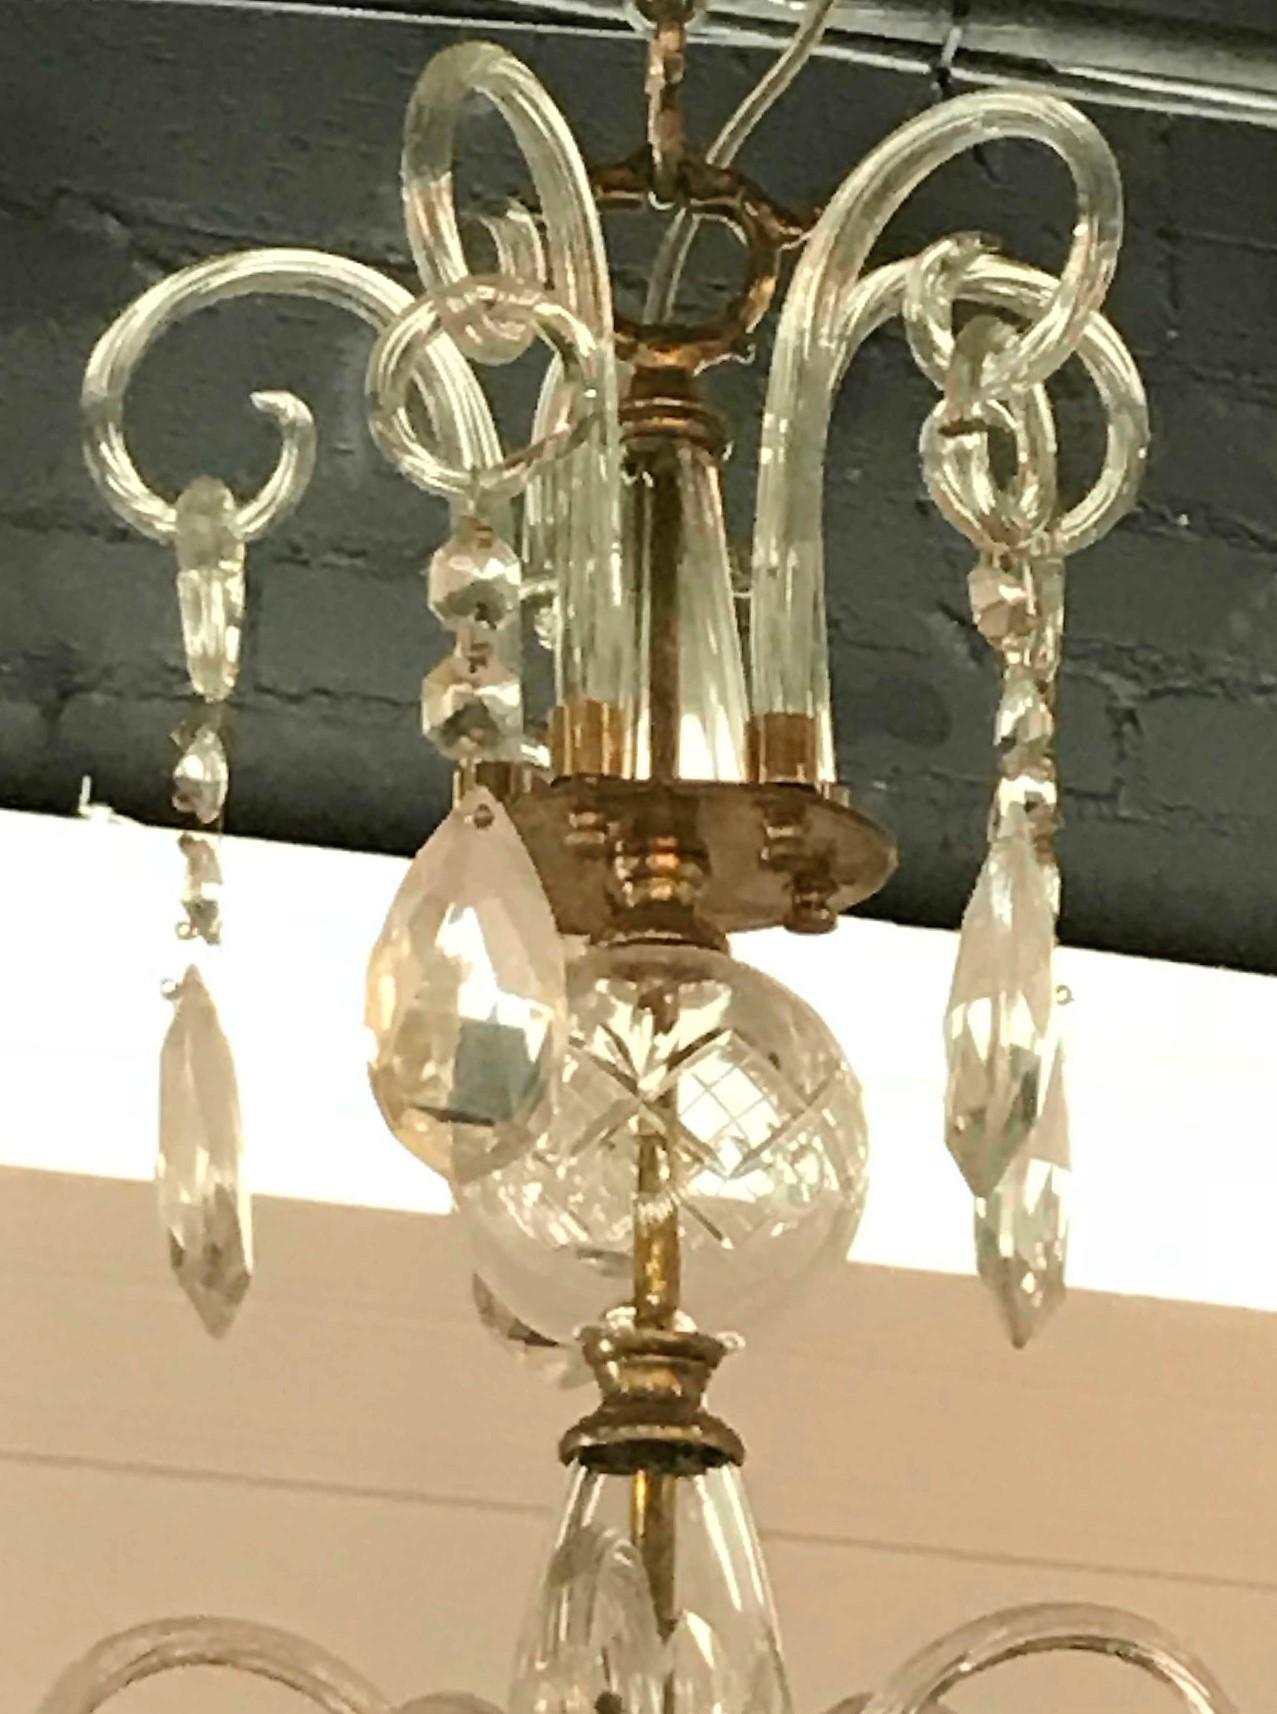 Lovely English brass, blown glass, and crystal chandelier. The crown with blown glass loops with suspended almond-shaped prisms atop a shaped stem surmounted with scrolled arms having cut crystal bobeche decorated with bead and pear-shaped prisms.